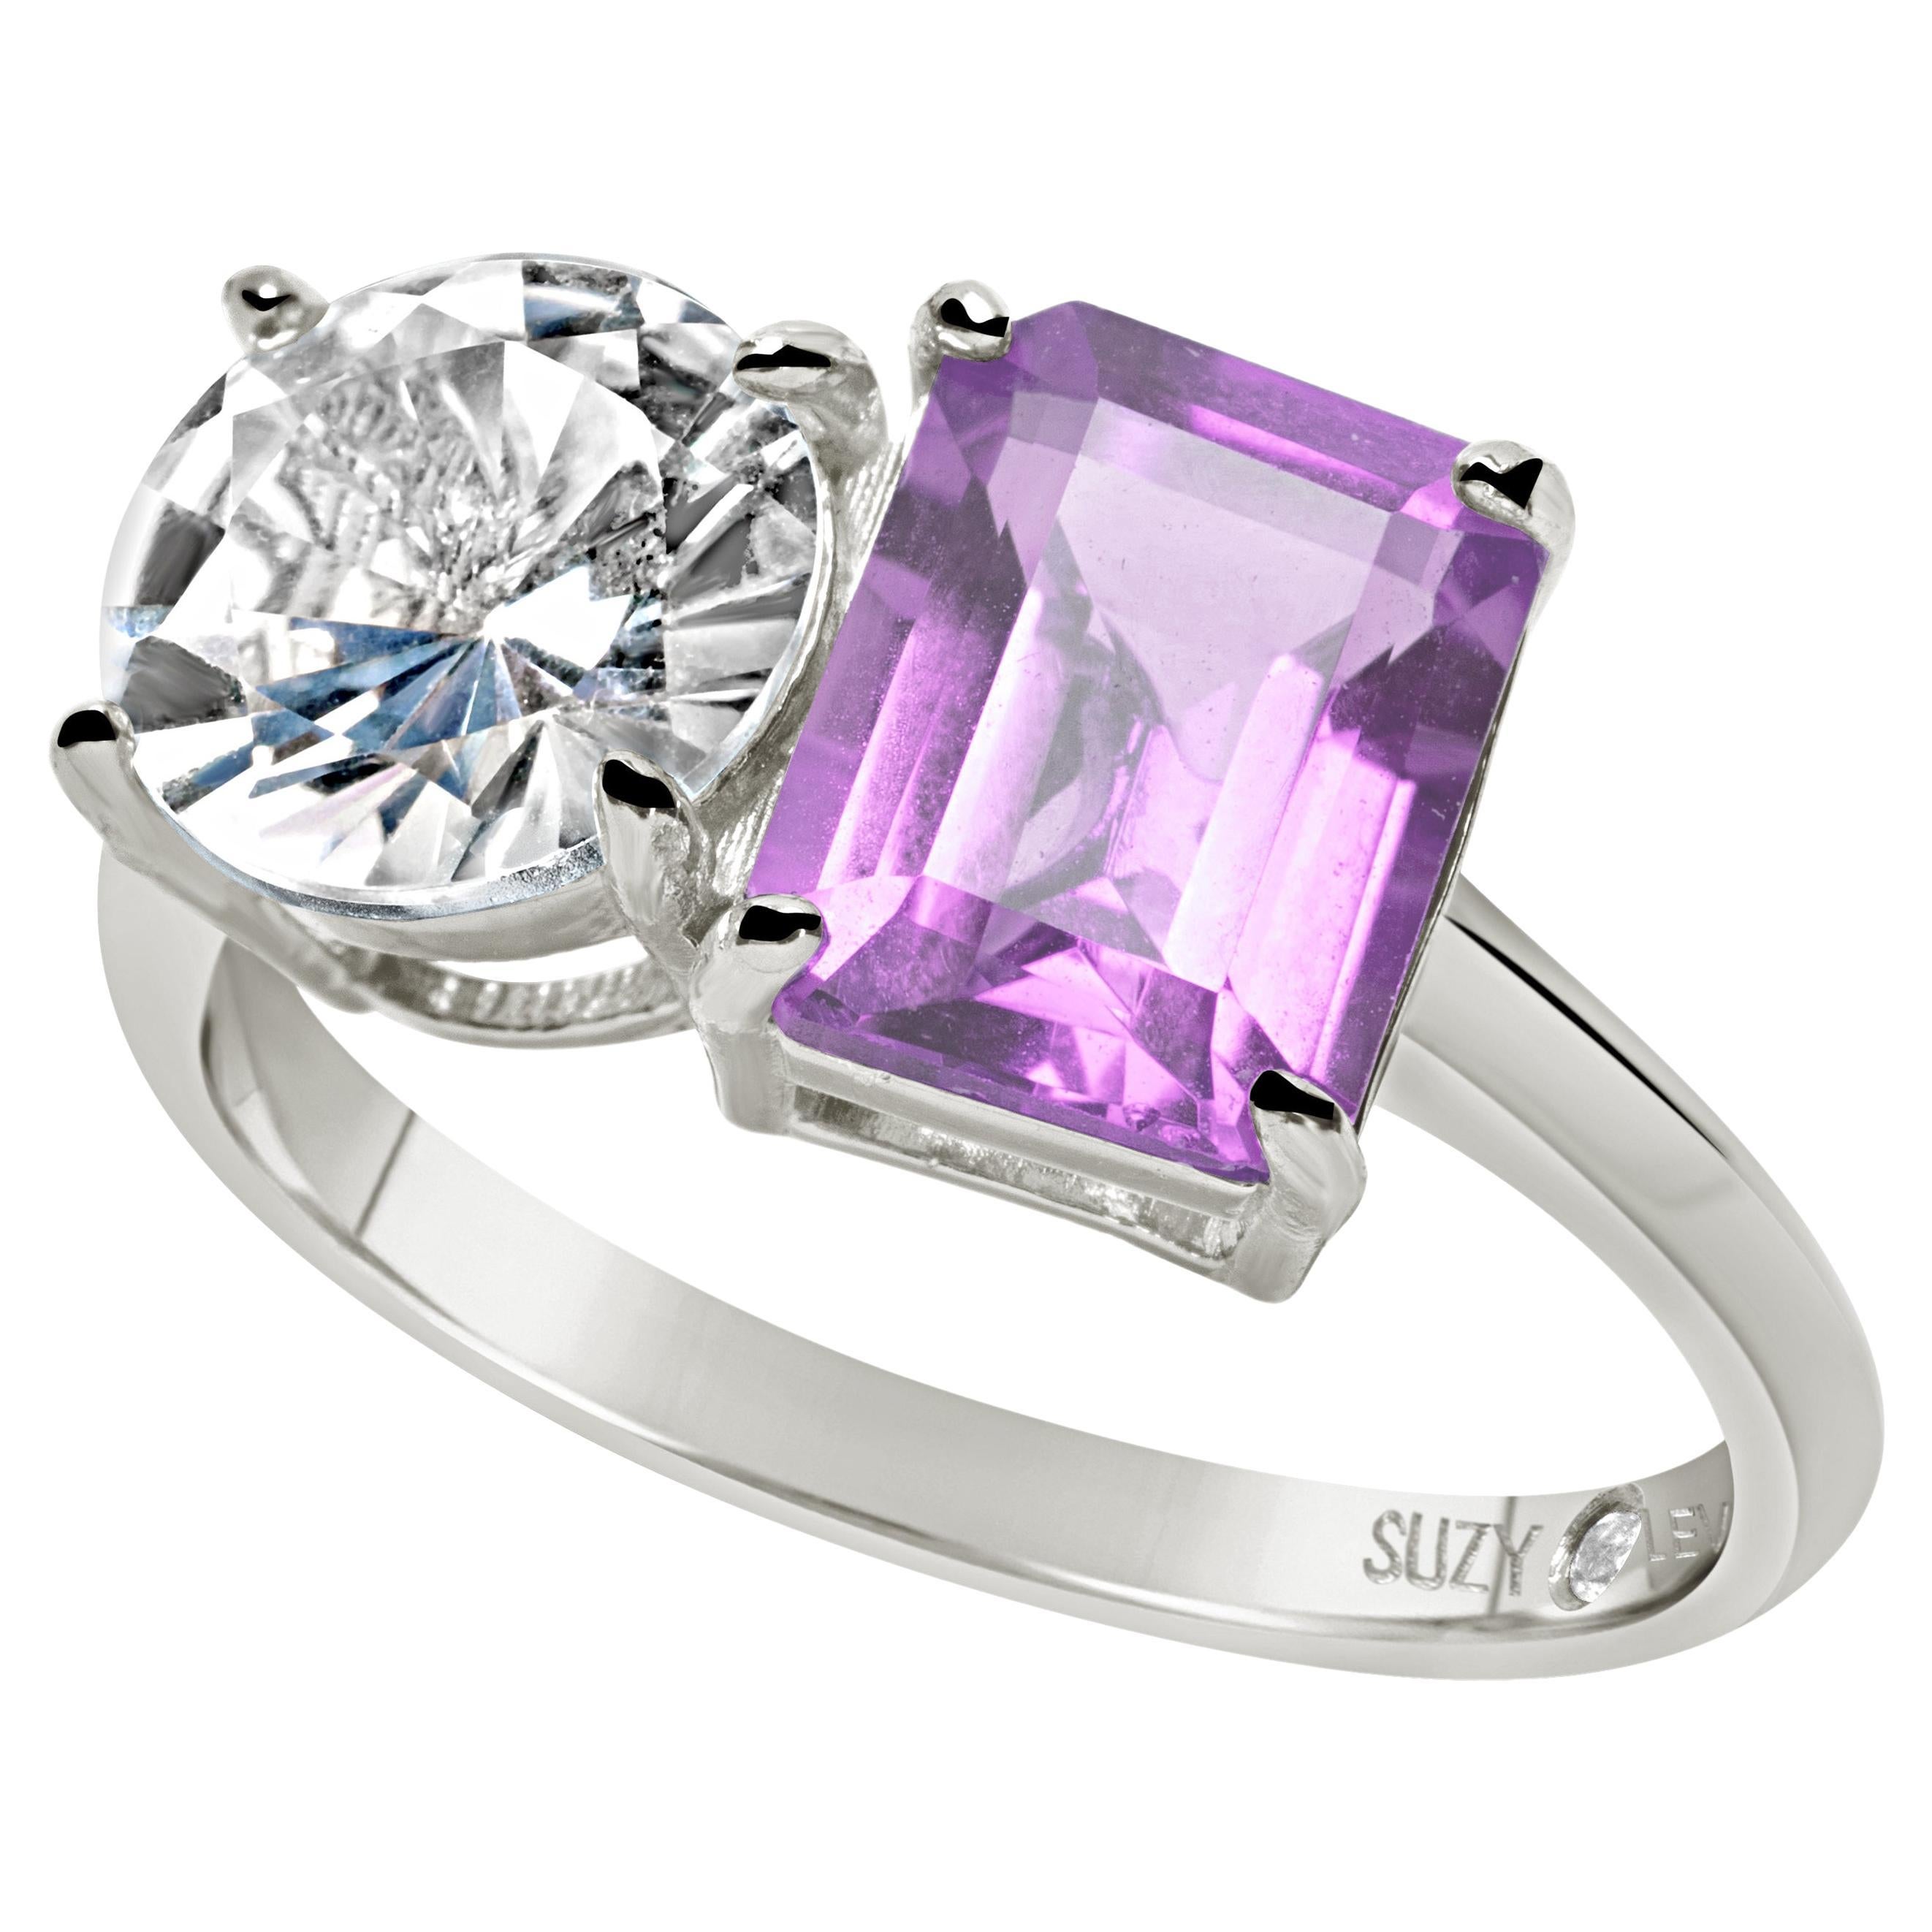 Suzy Levian Sterling Silver White Topaz & Purple Amethyst Two Stone Ring For Sale